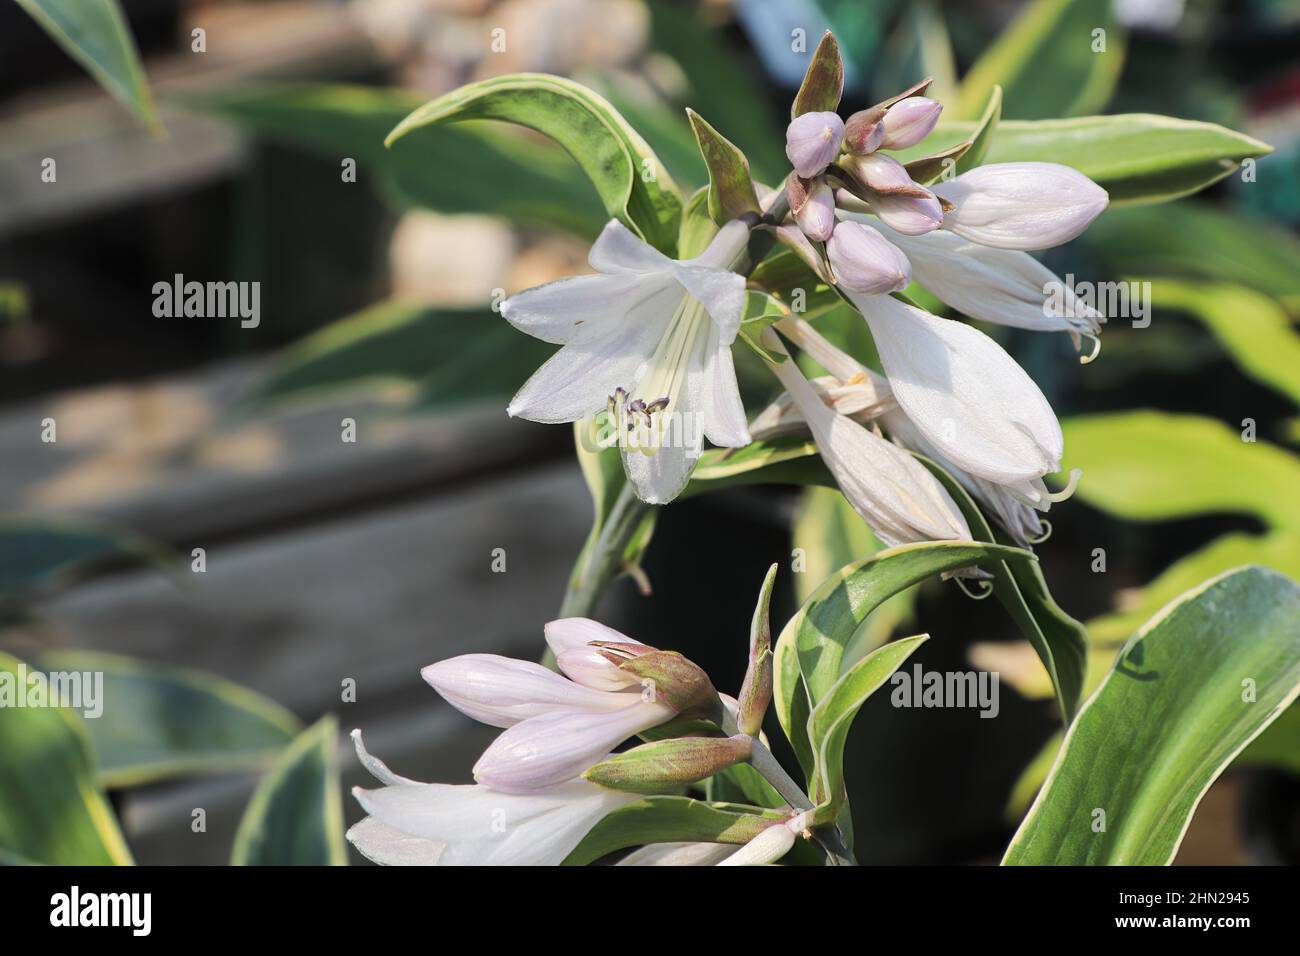 Delicate pink blossoms on a hosta plant. Stock Photo